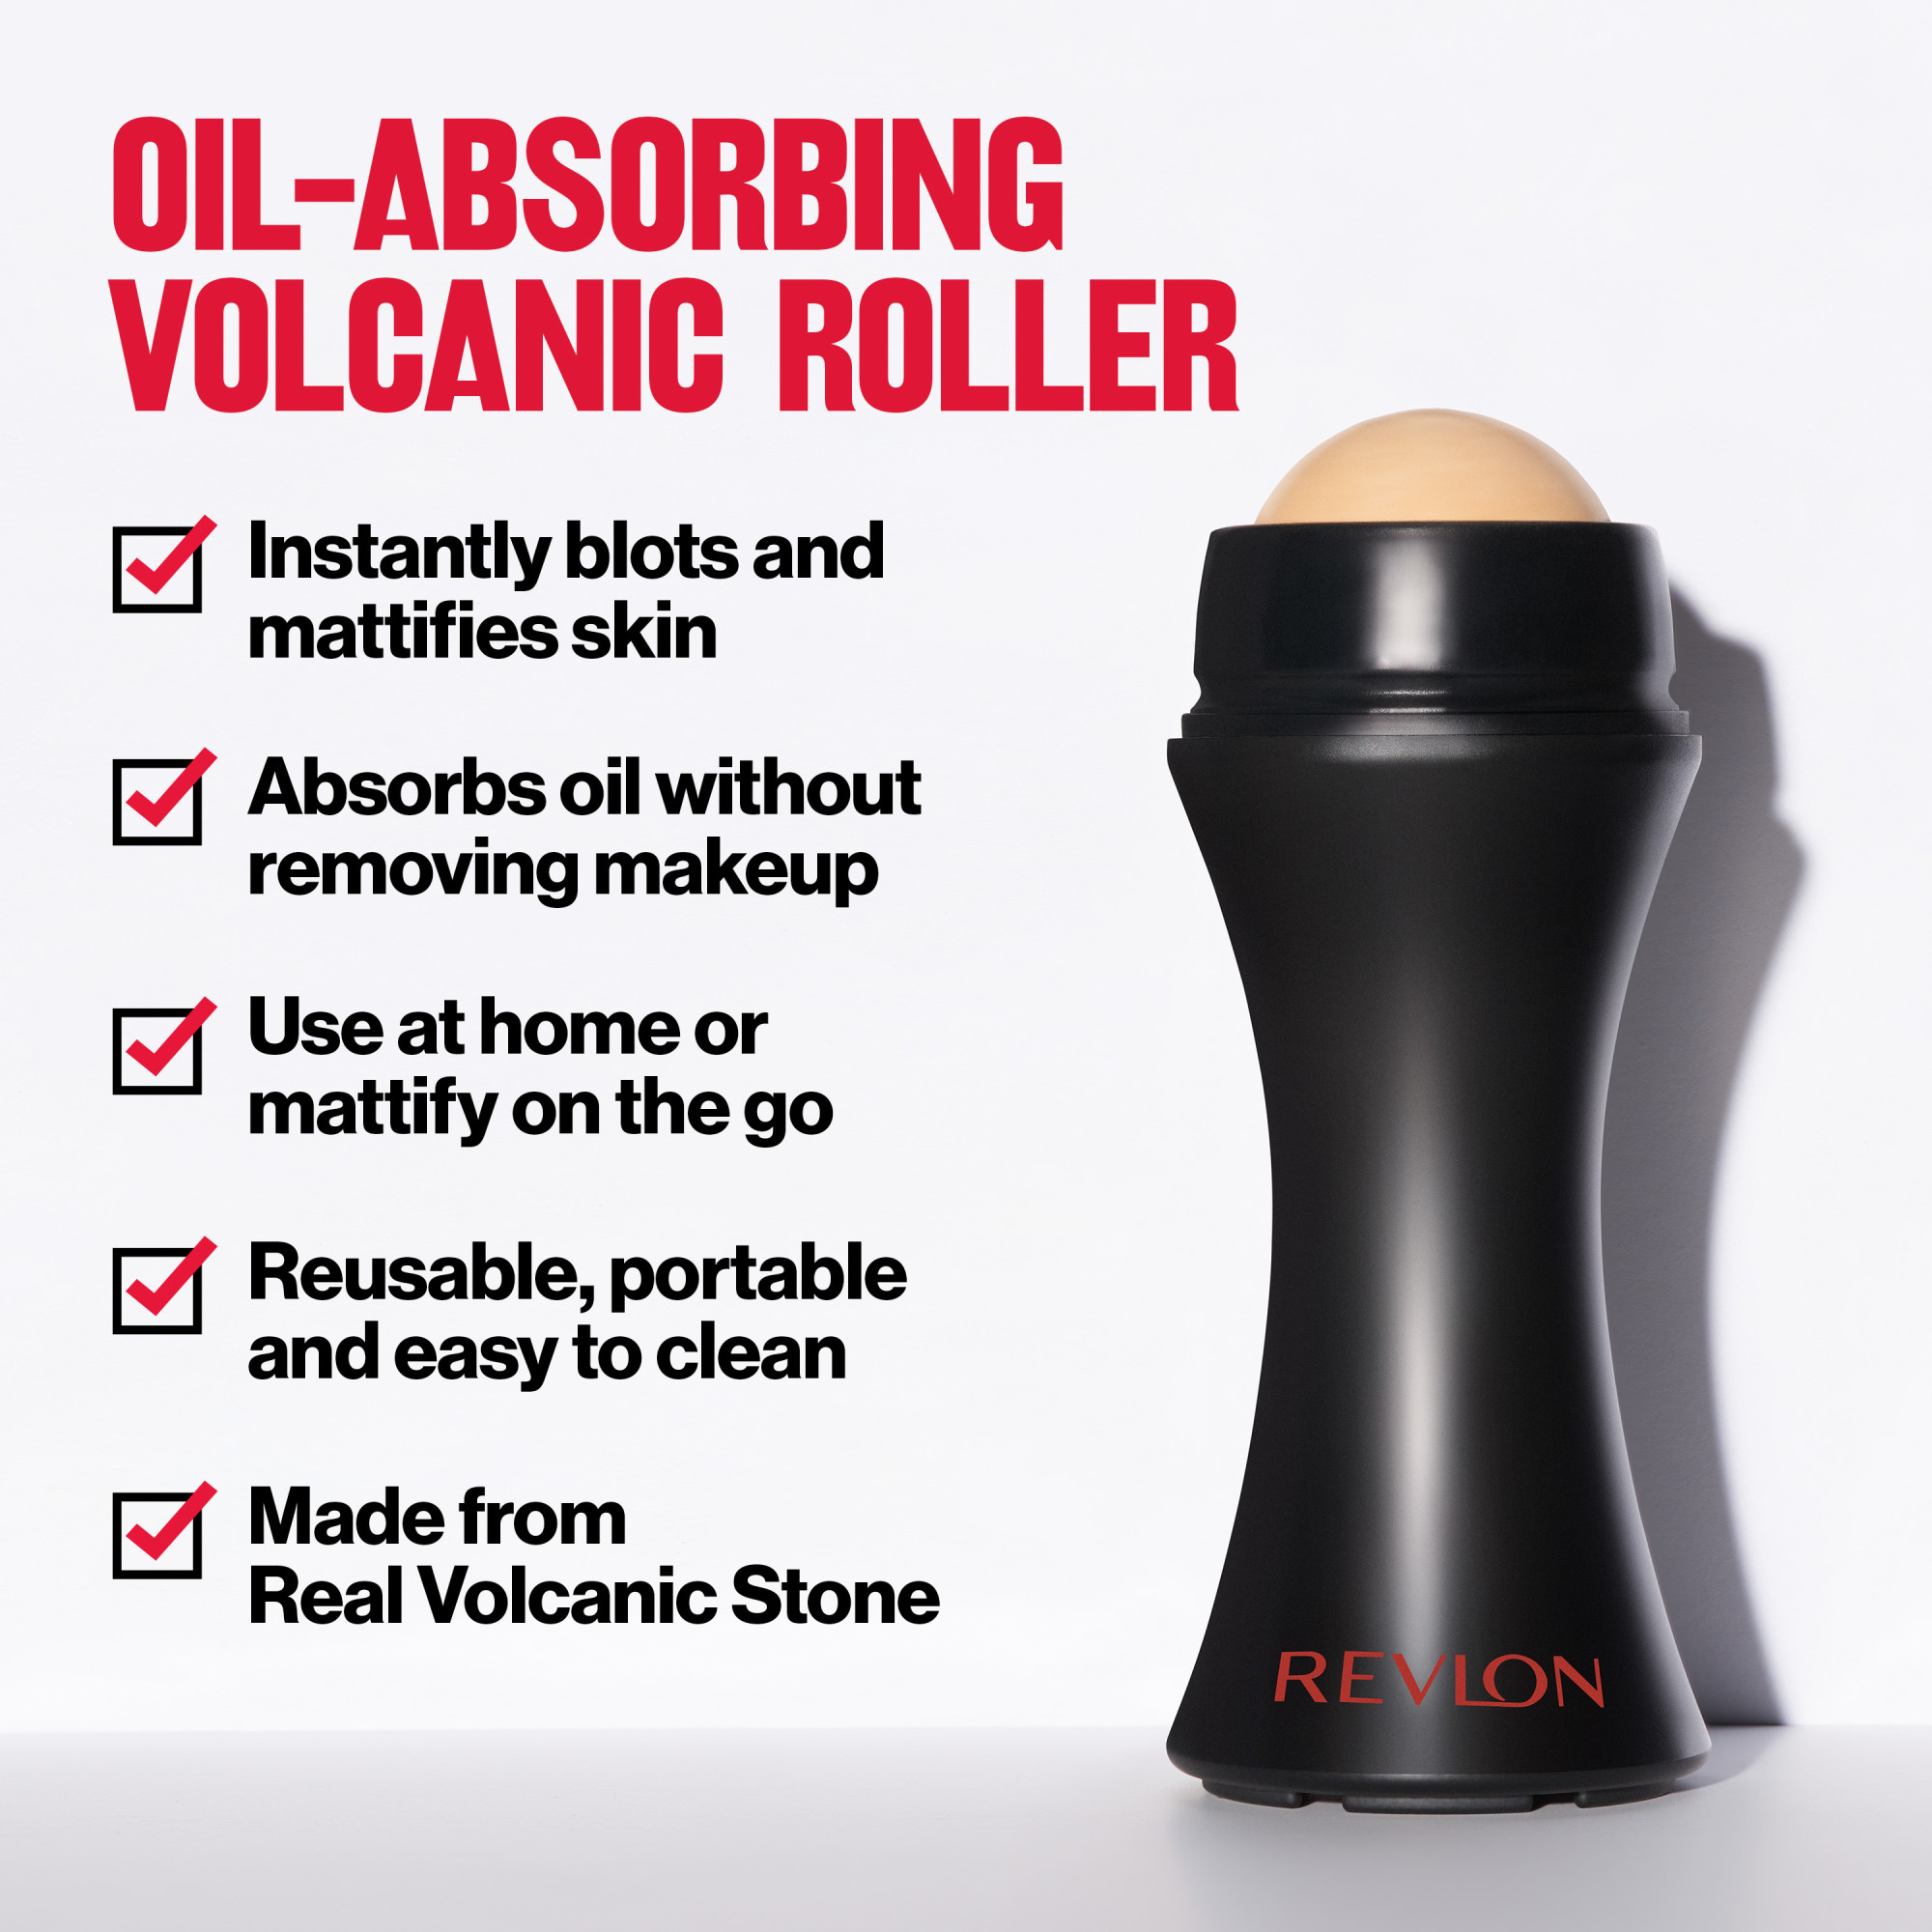 Revlon Oil Control On The Go Portable Oil Absorbing Roller, 1 count - image 4 of 14